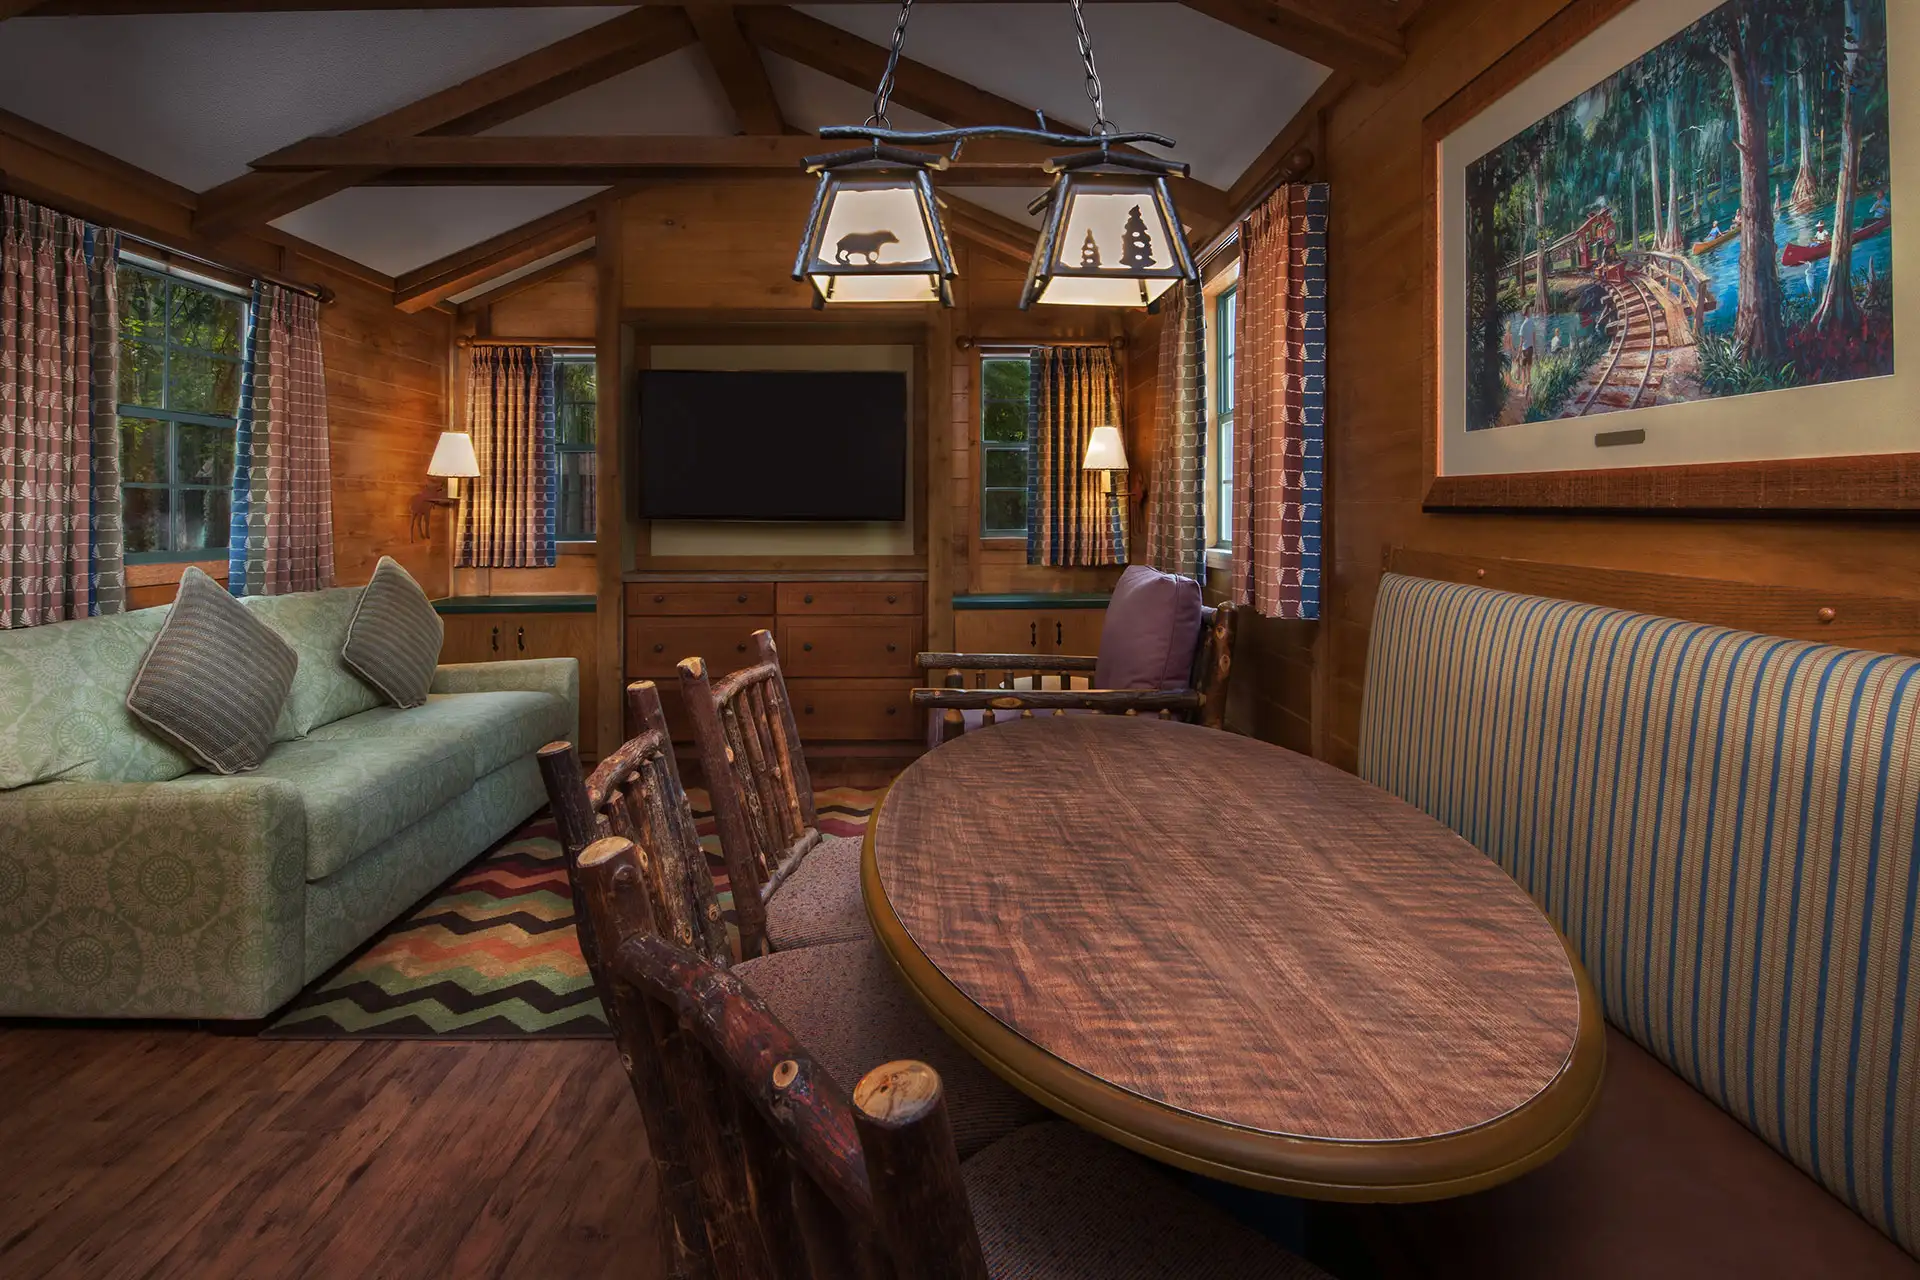 The Cabins at Disney's Fort Wilderness Resort; Courtesy of Disney